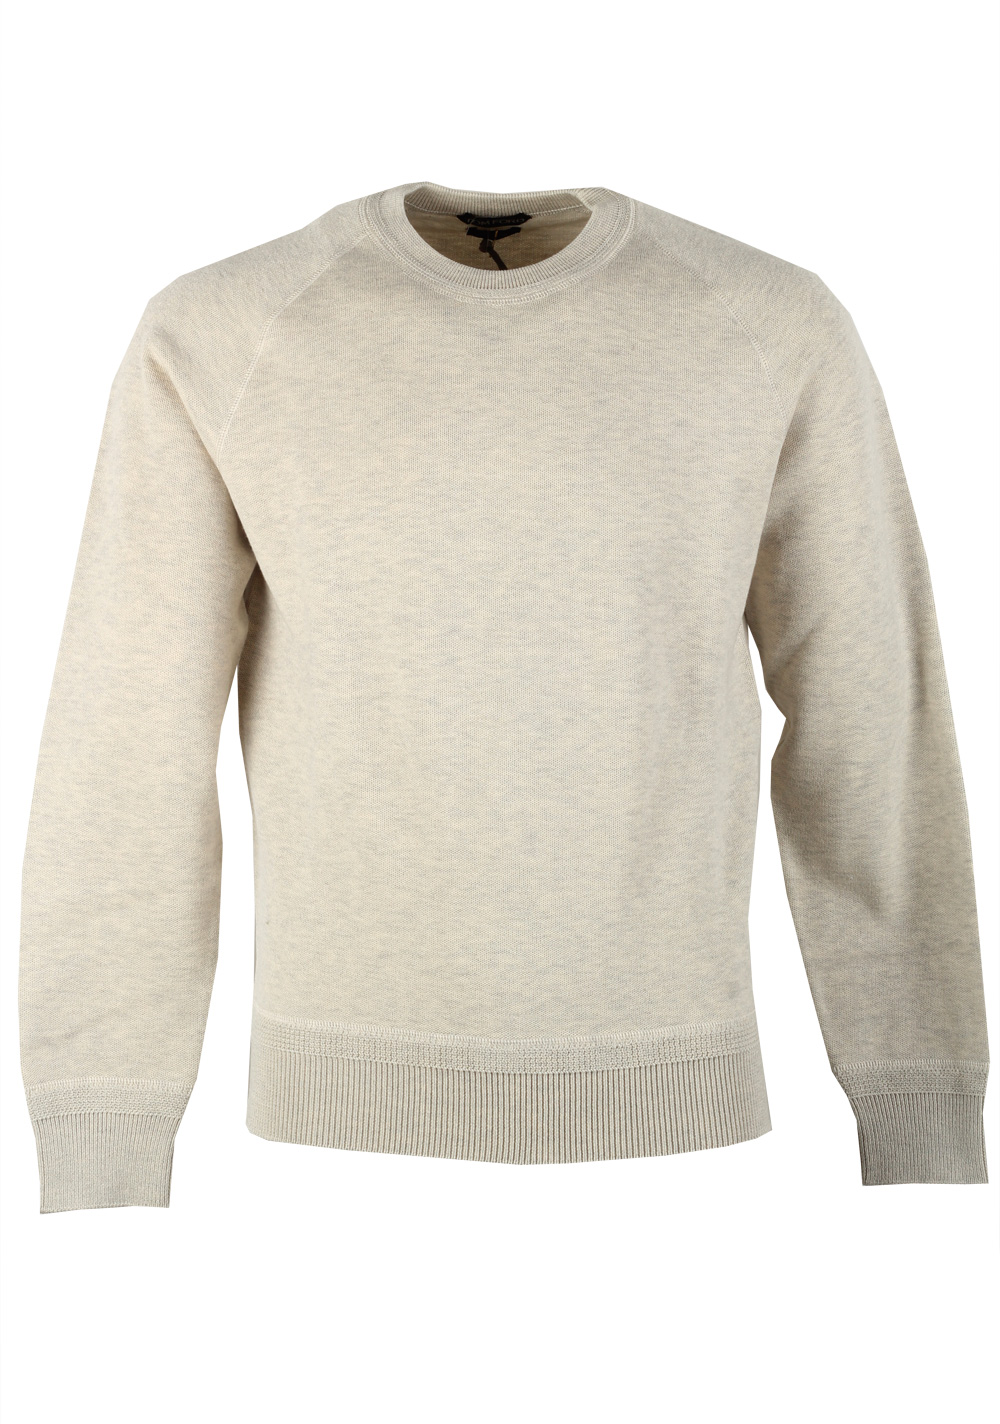 TOM FORD Gray Crew Neck Sweater Size 48 / 38R U.S. In Cotton | Costume ...